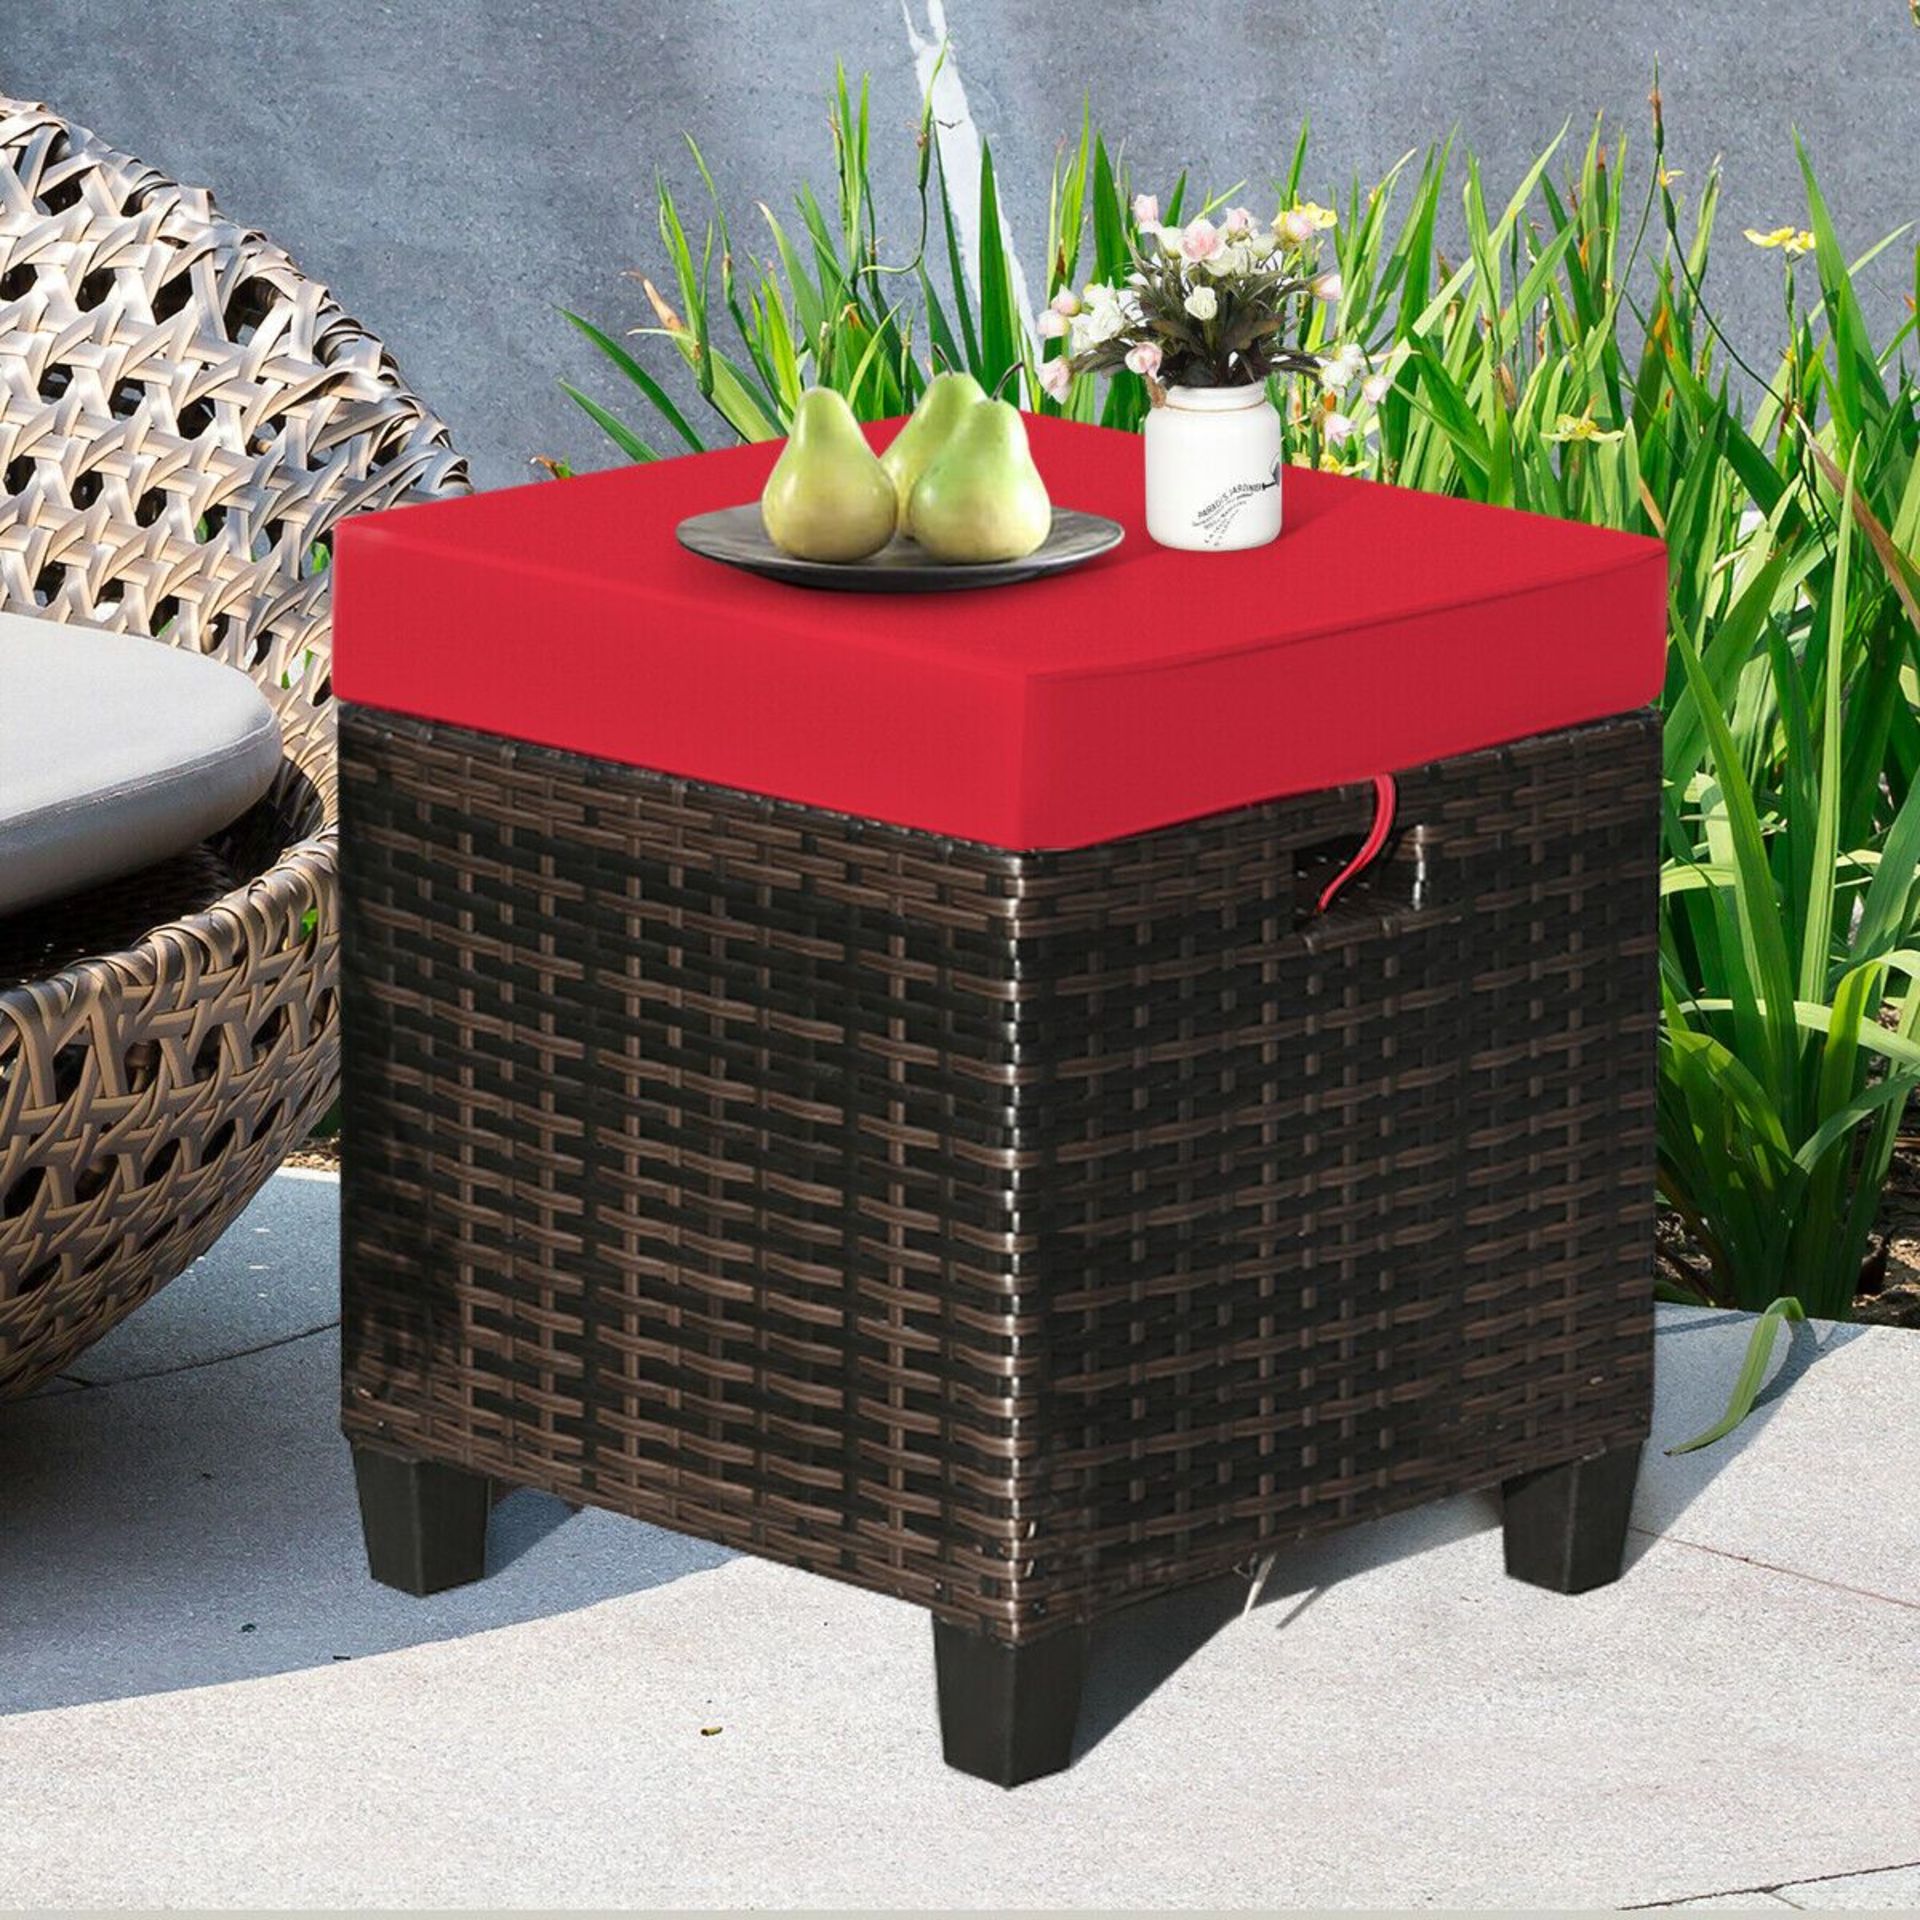 Set of 2 Outdoor Rattan Ottoman Chair Seat with Padded Cushions. RRP £125.00. Made of PE wicker